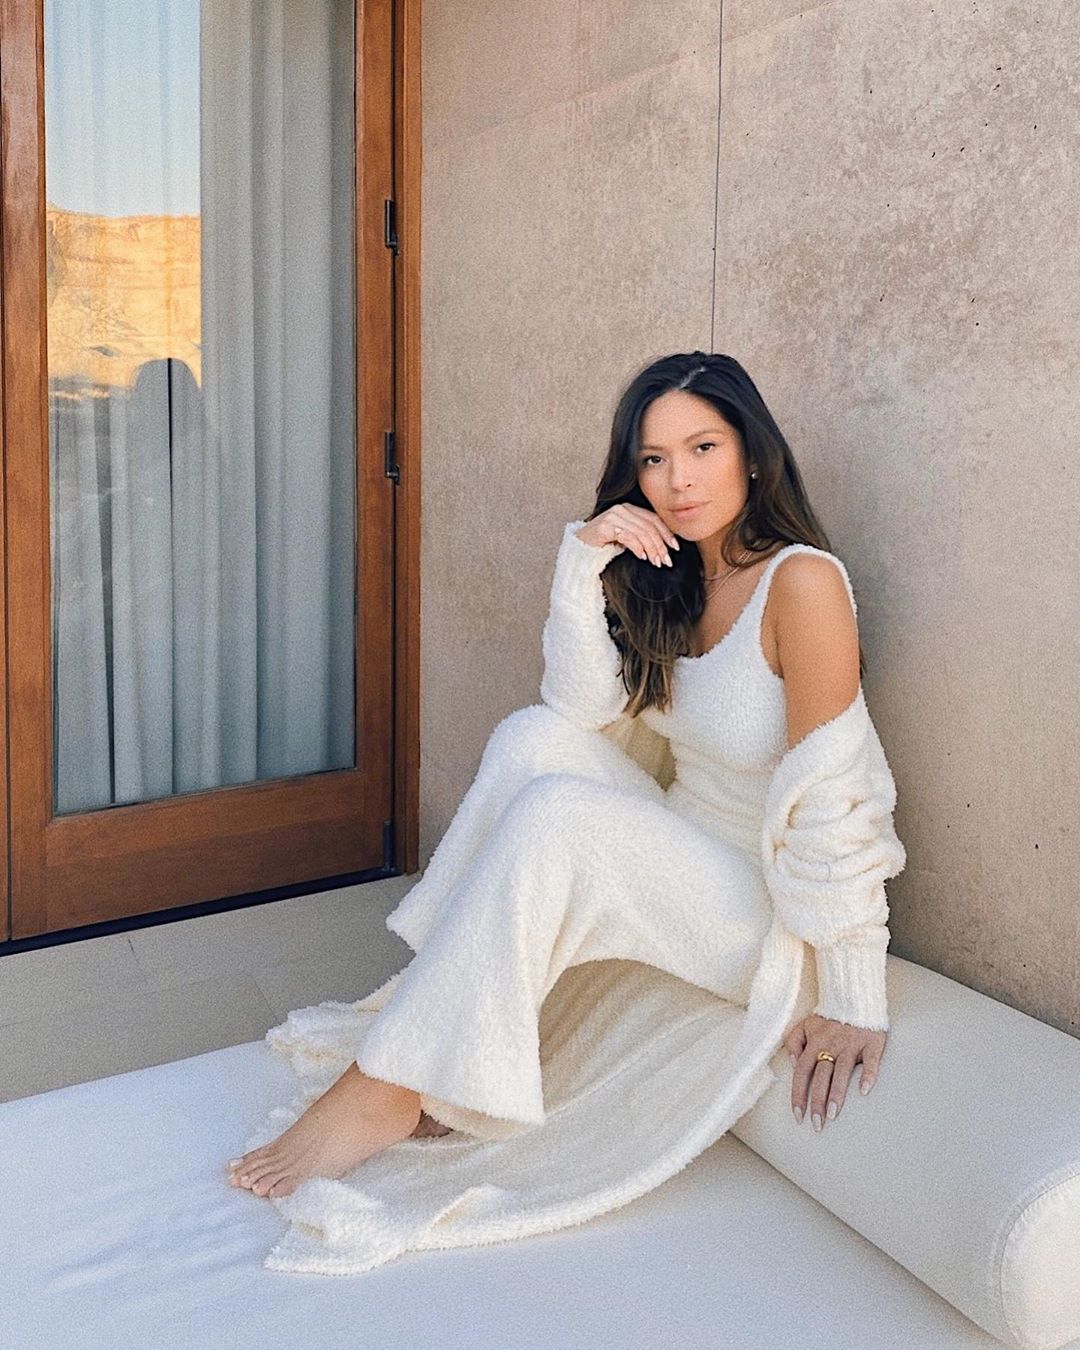 SKIMS on X: .@marianna_hewitt wears the Cozy Knit Pant and Cozy